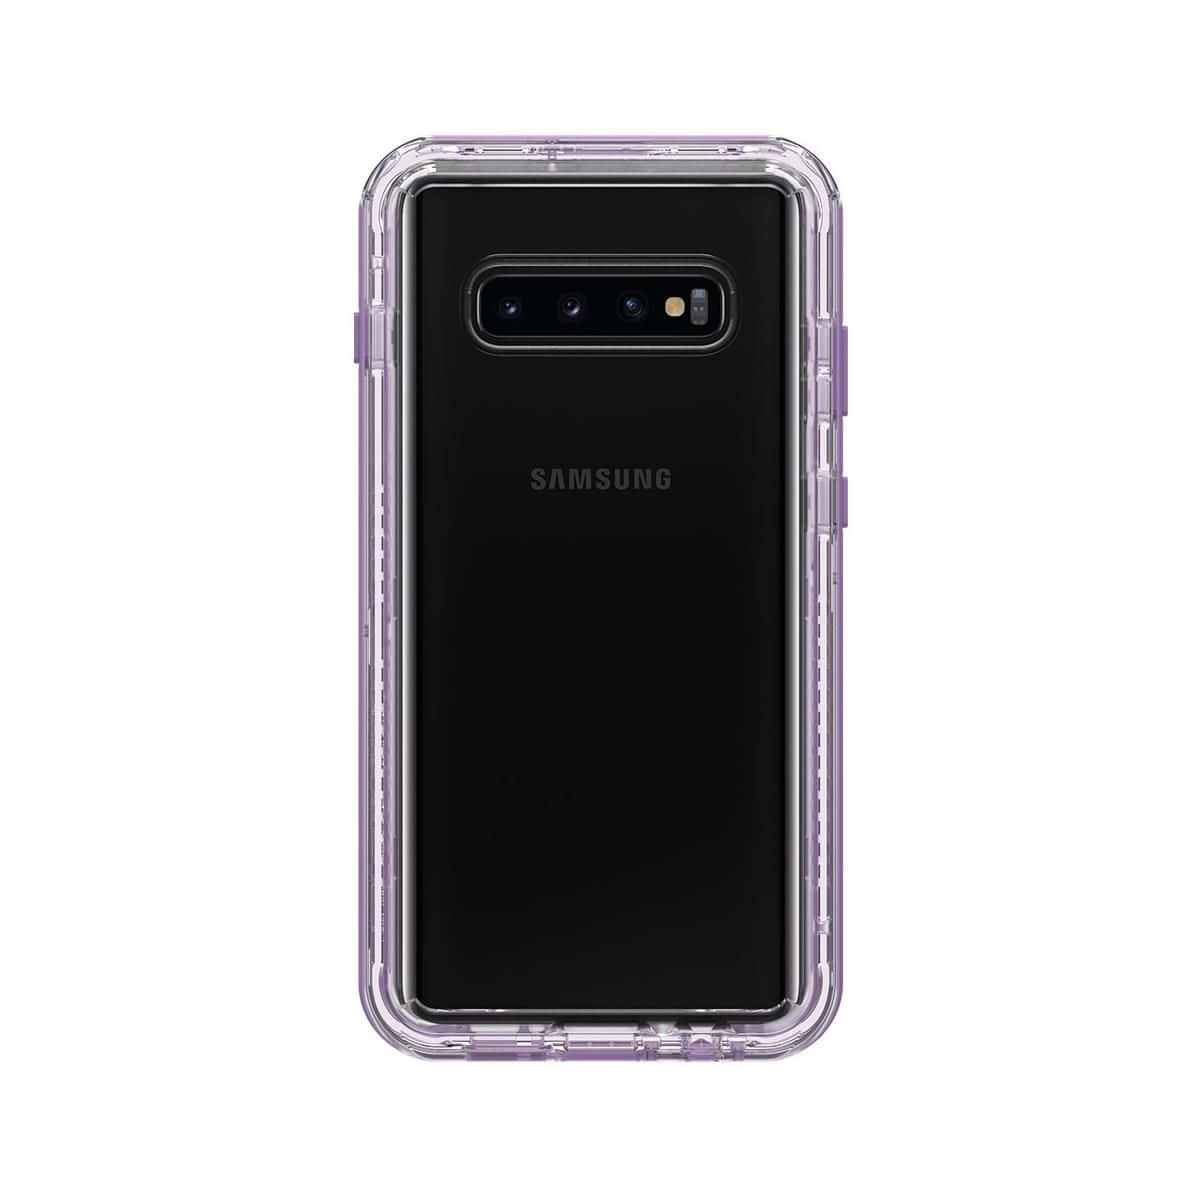 The All-New Samsung Galaxy S10